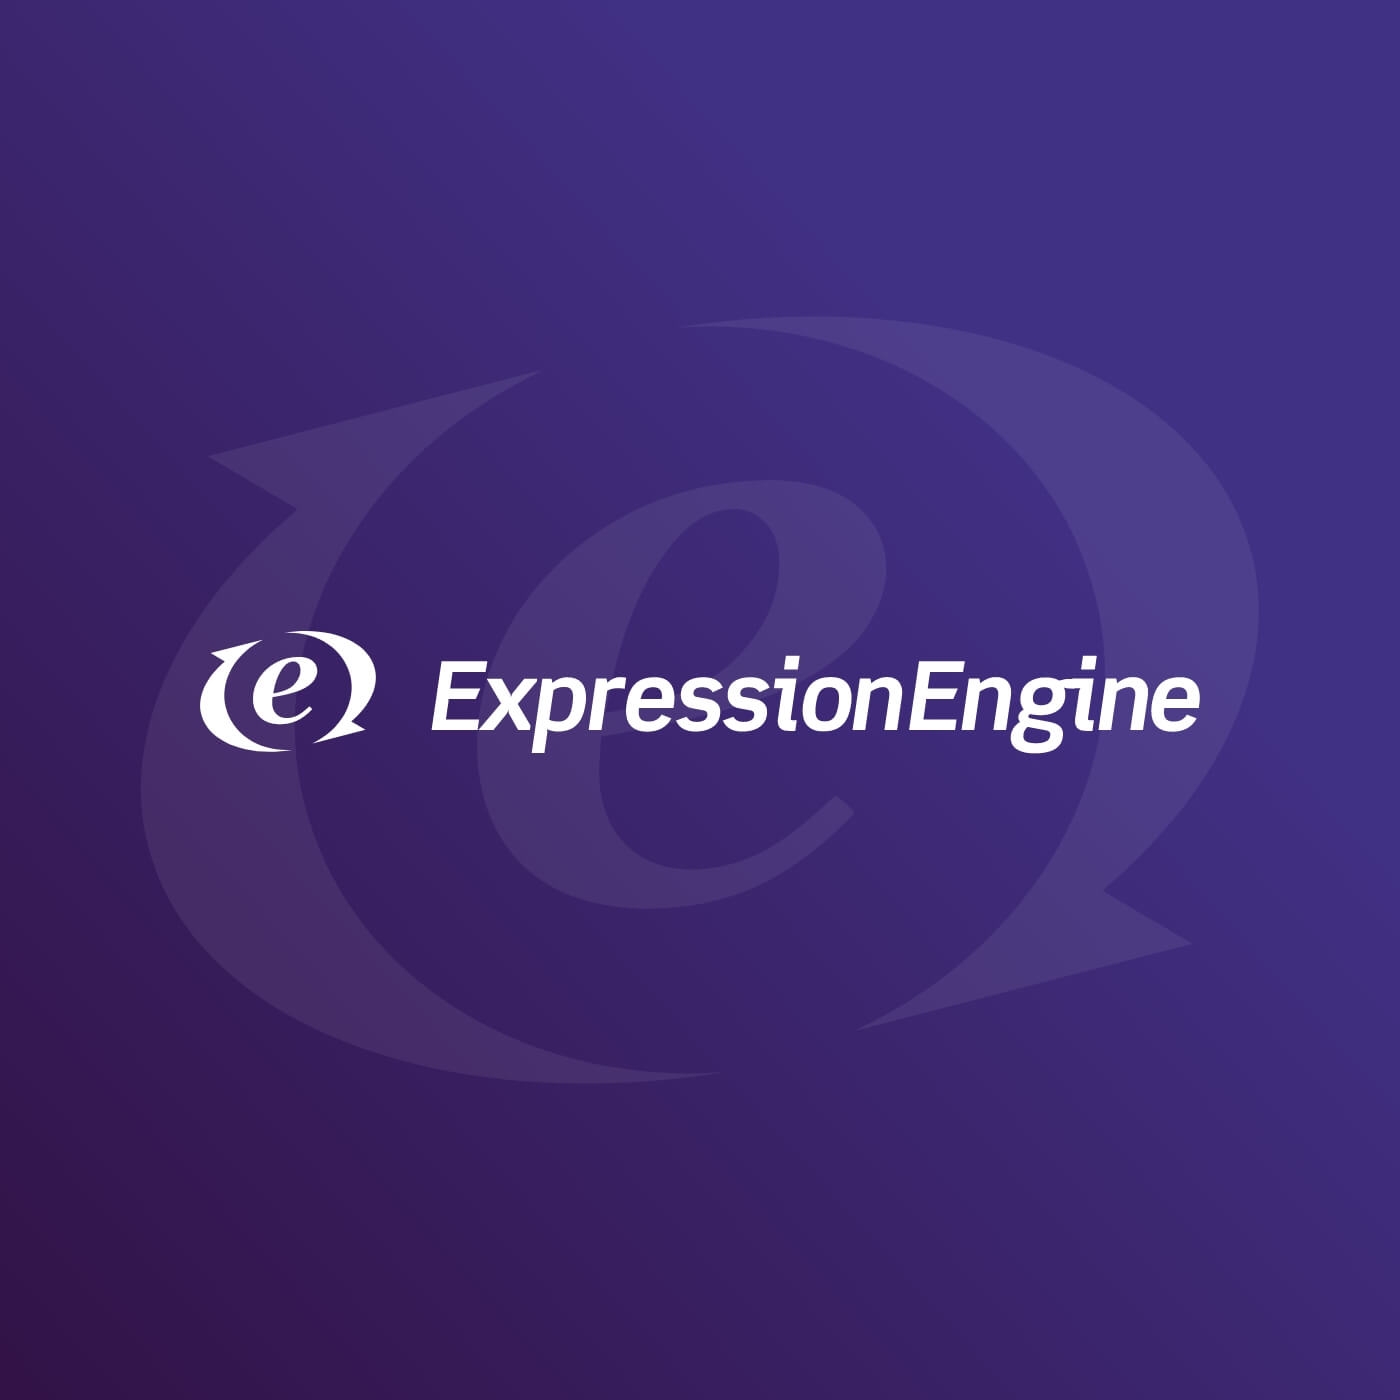 https://www.optimadesign.co.uk/assets/images/common/Expression_Engine_Mobile.jpg